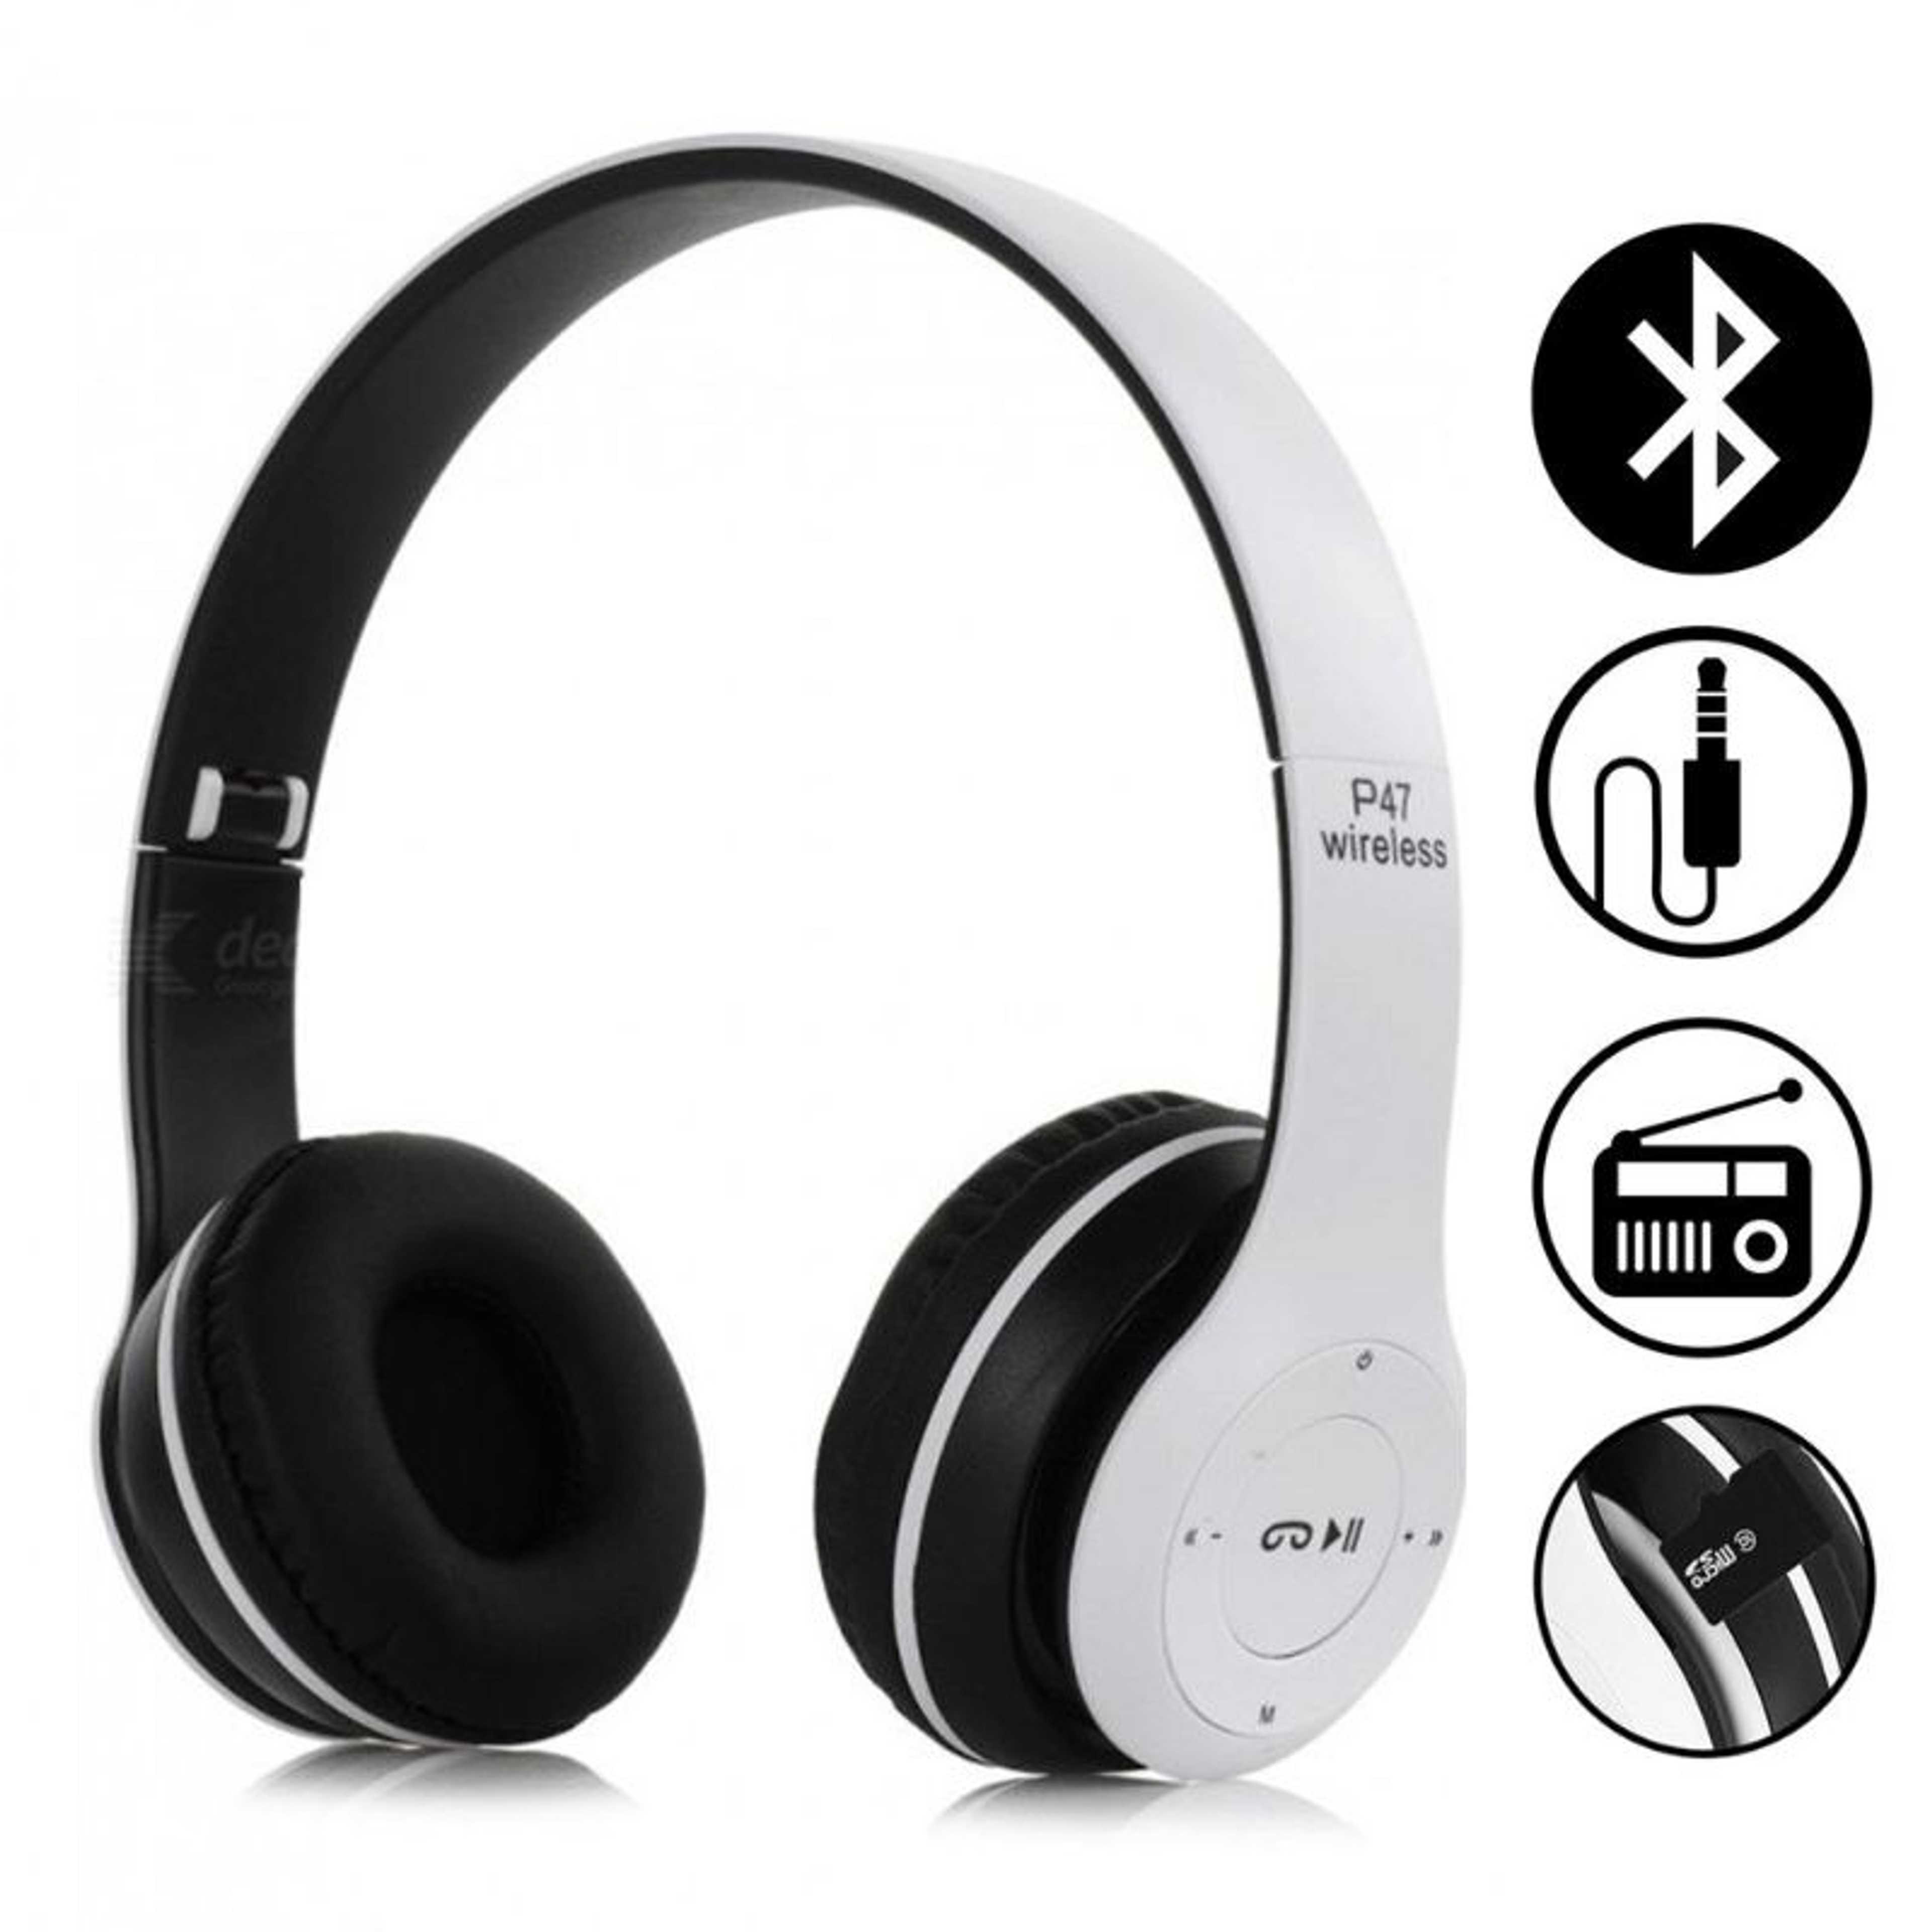 Wireless Headphones, P47 Bluetooth Foldable Headset with Microphone Support FM Radio TF for PC TV Smart Phones & Tablets Etc